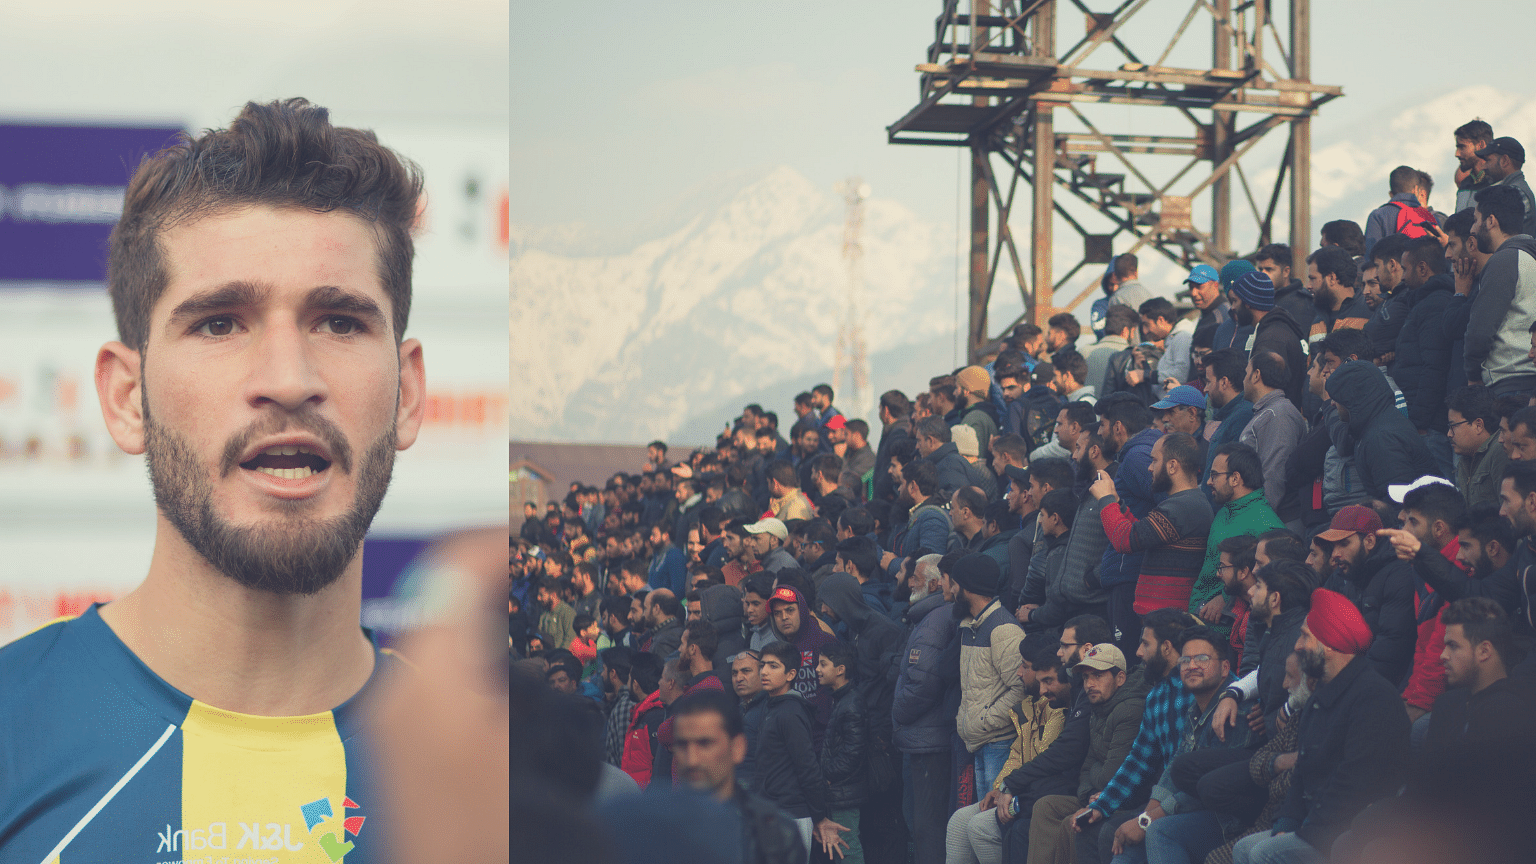 Danish Farooq (left) and the crowd witnessing the first-ever I-League match in Kashmir on Tuesday.